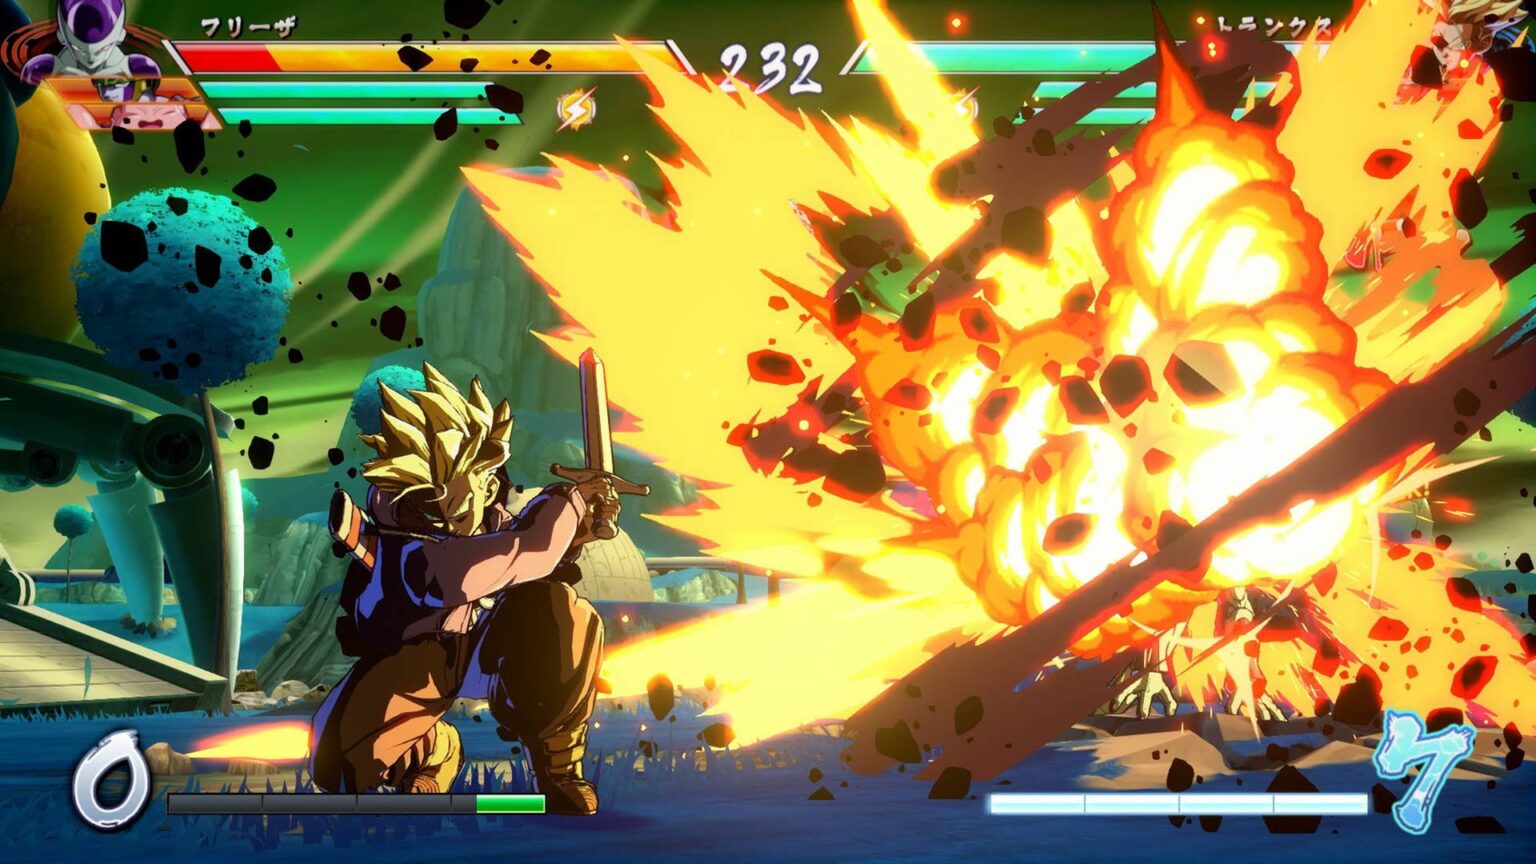 Explained DBFZ patch notes (1.32) • TechBriefly